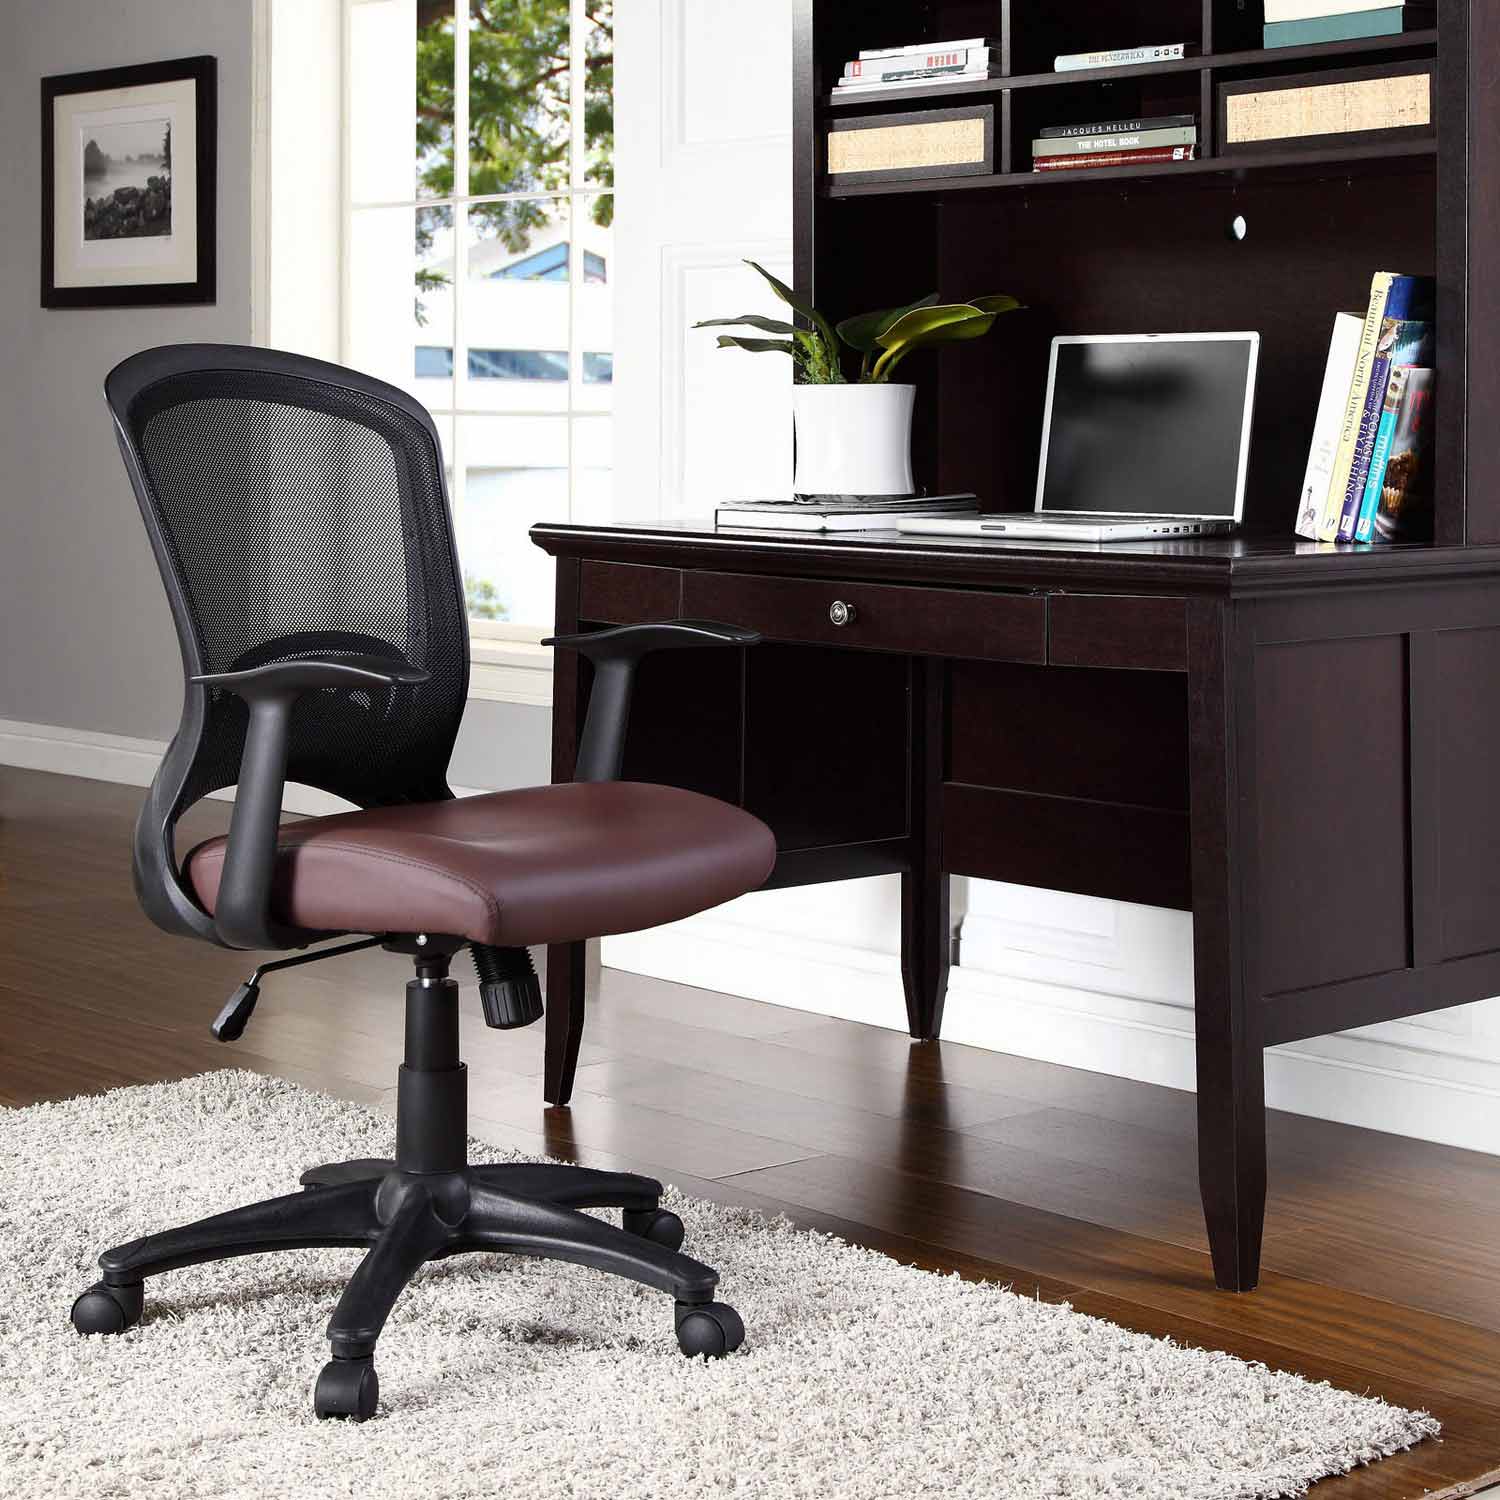 Modway Pulse Vinyl Office Chair - Brown